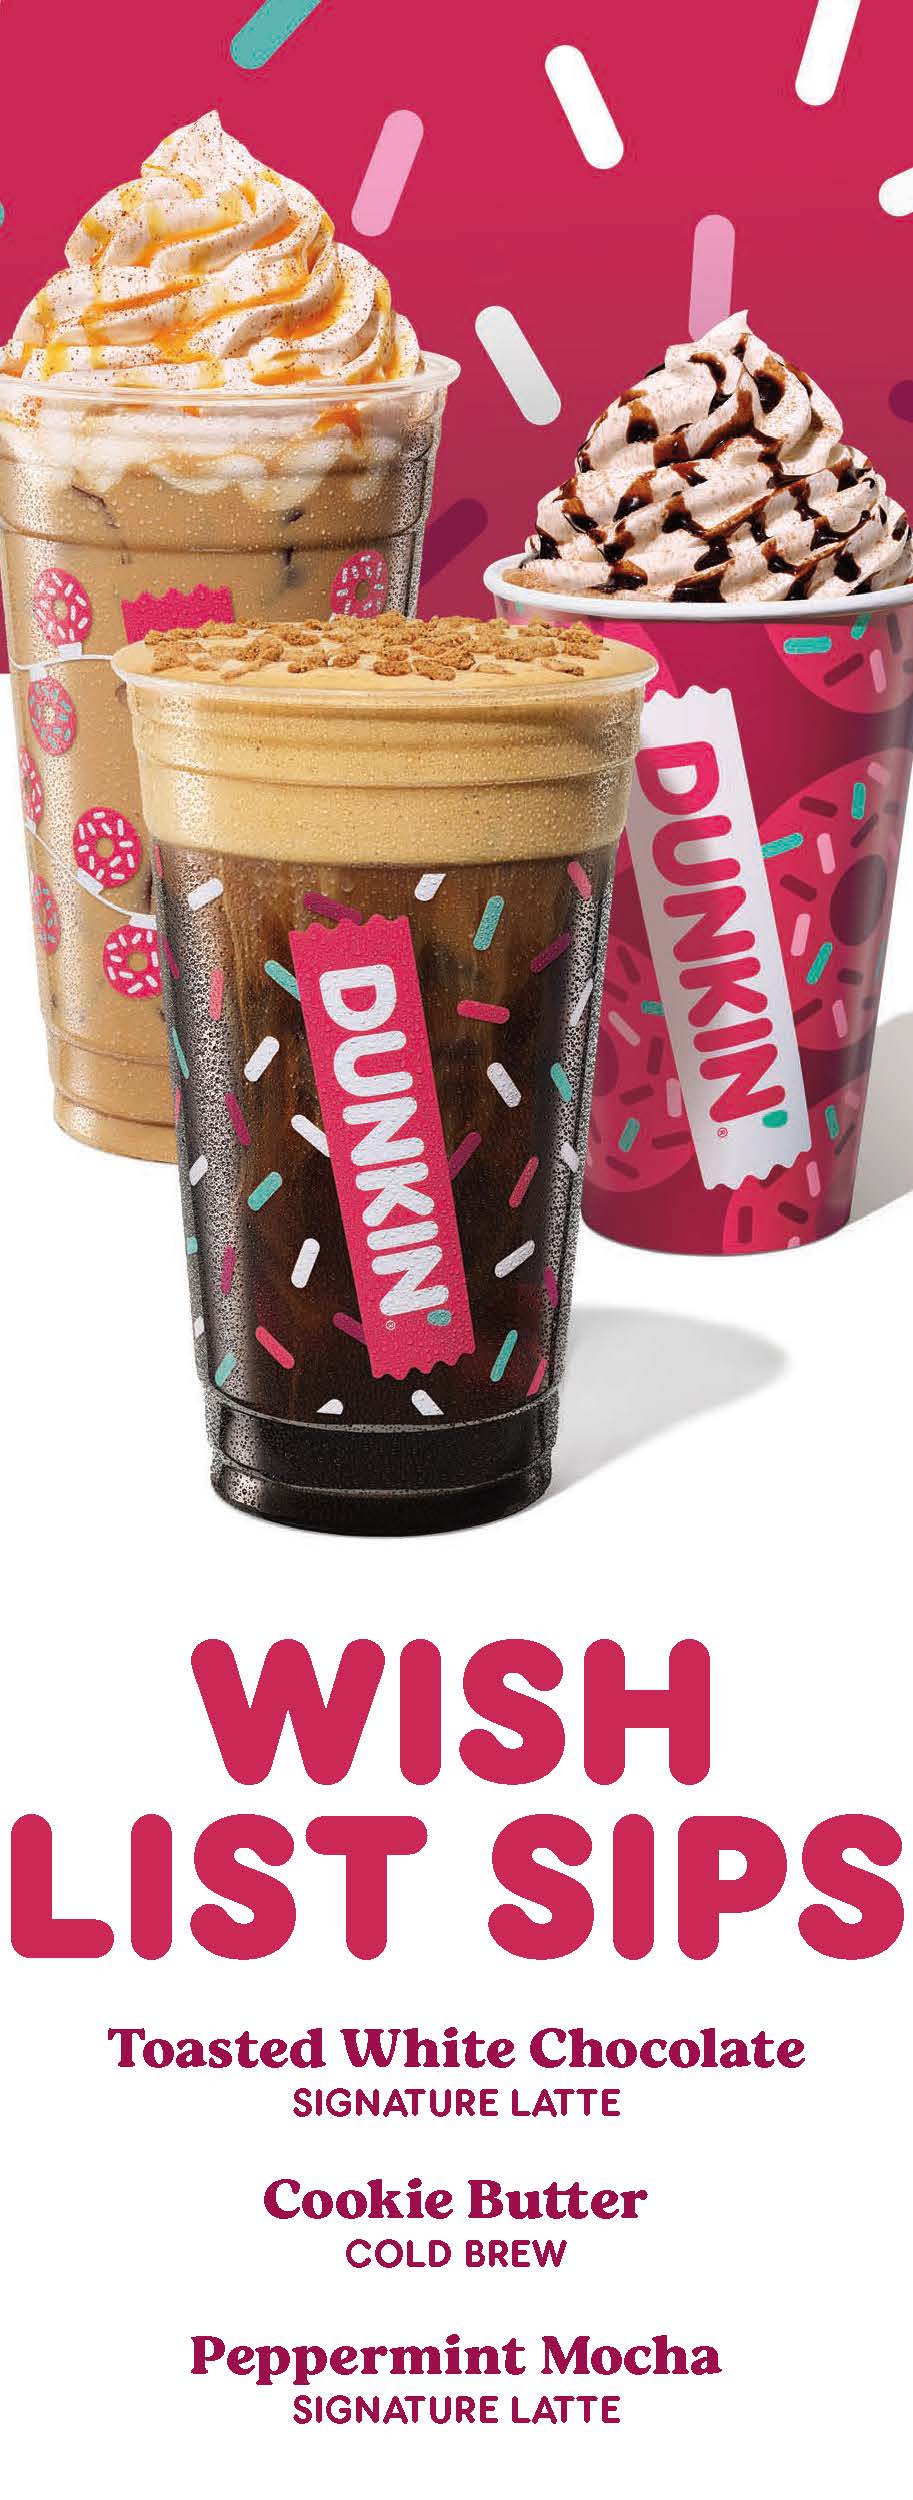 Dunkin's new 2023 holiday menu includes a new Spiced Cookie Coffee, made with brown sugar, and (pictured) the Toasted White Chocolate latte, the return of the Cookie Butter Cold Brew, and the Peppermint Mocha latte.